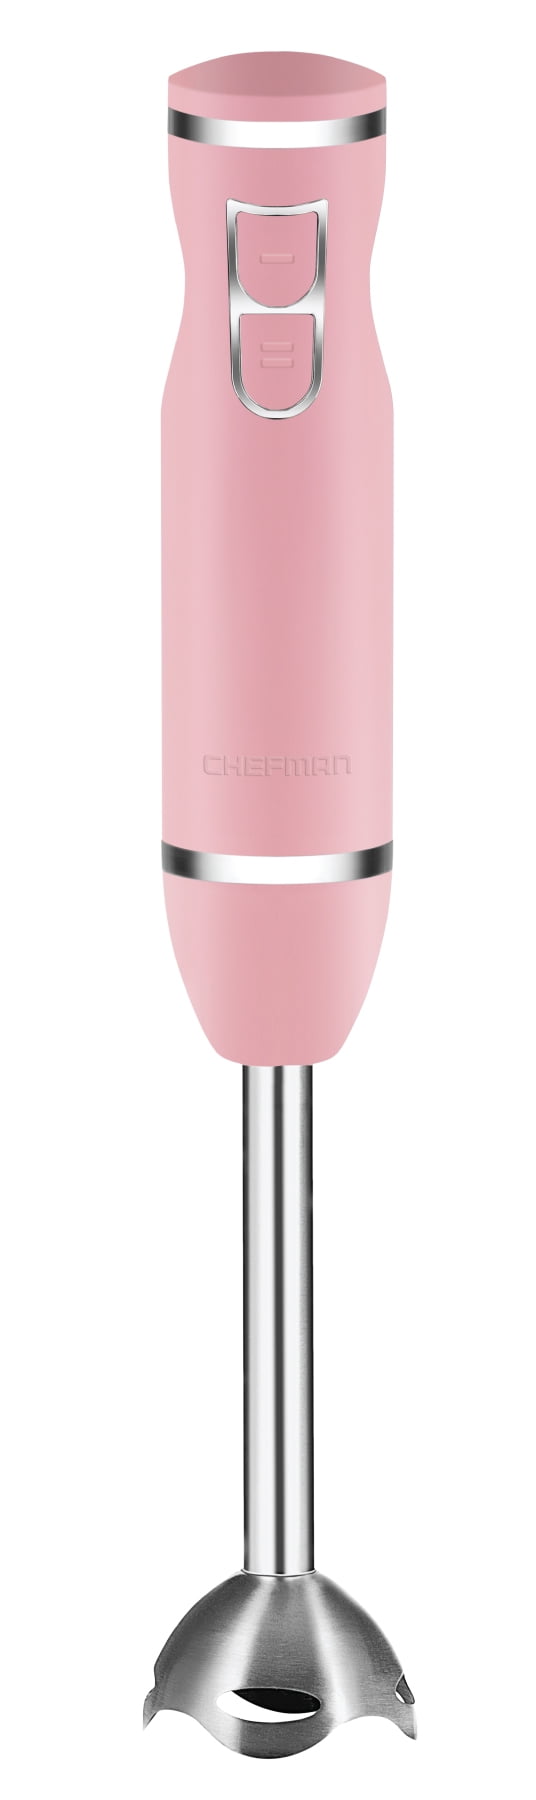  Dash Chef Series Immersion Hand Blender, 5 Speed Stick Blender  with Stainless Steel Blades, Whisk Attachment and Recipe Guide – Pink: Home  & Kitchen